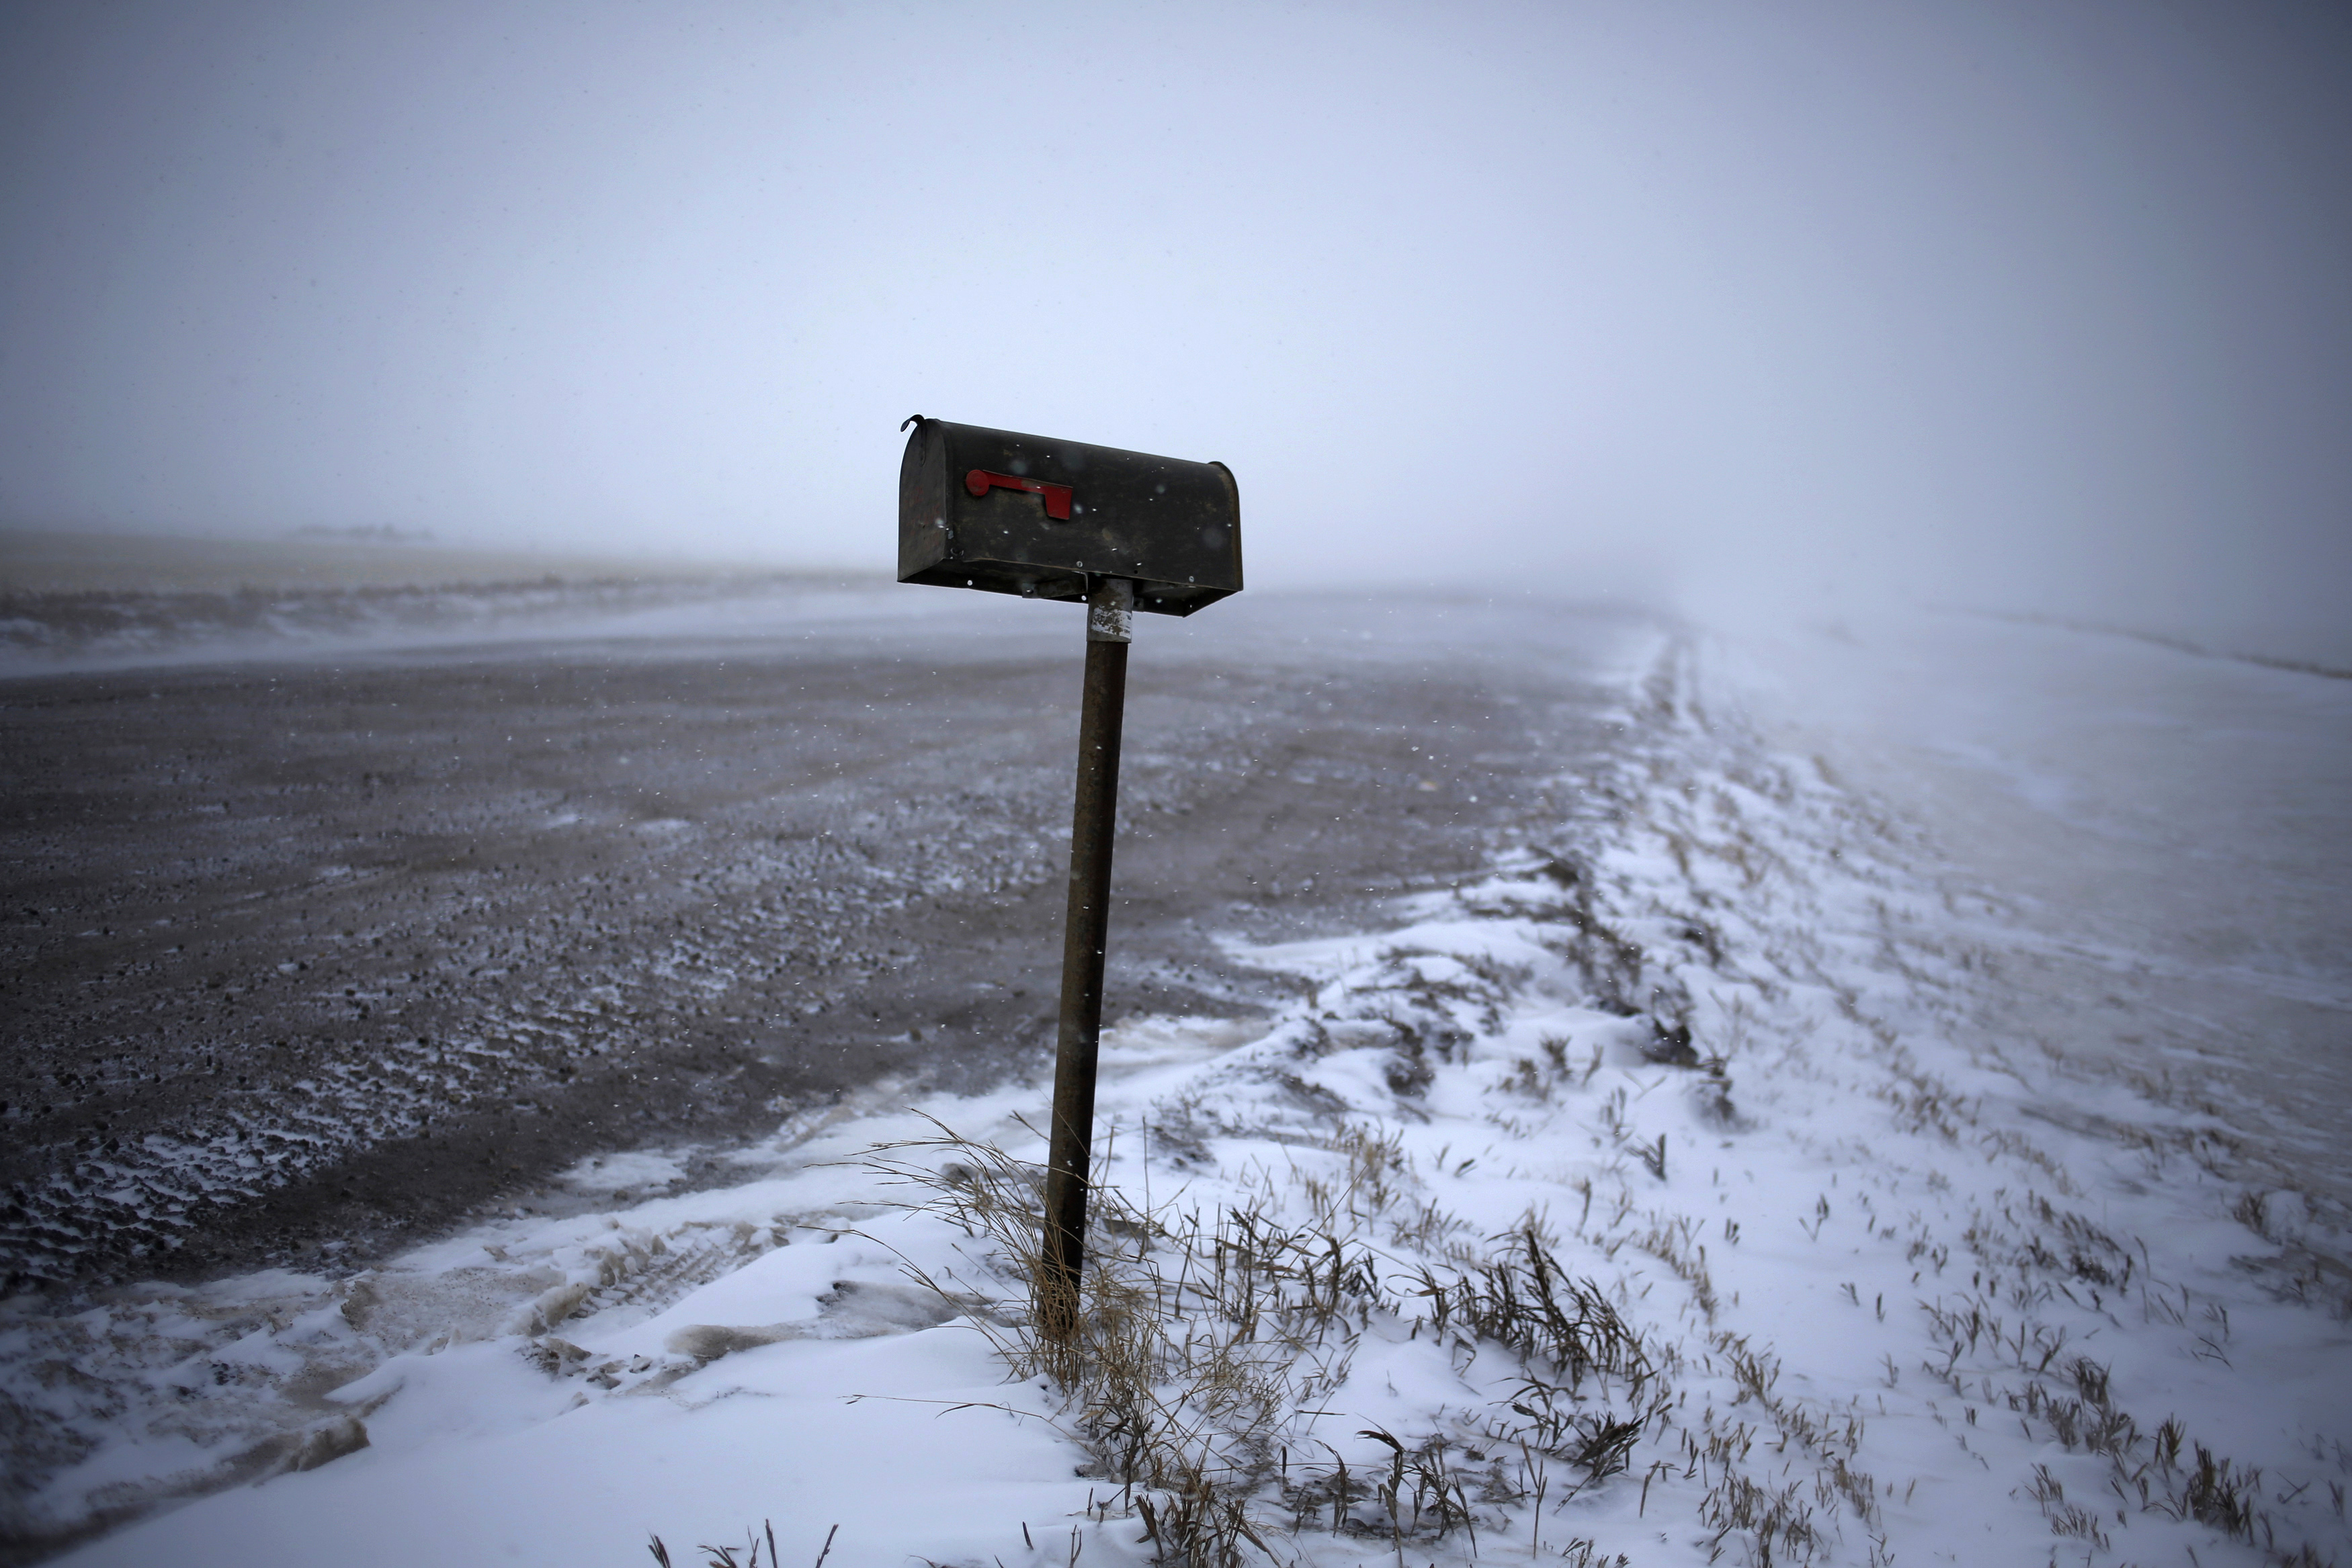 A mailbox is seen along a road during a snowstorm outside of Williston, North Dakota March 11, 2013. (Shannon Stapleton&mdash;Reuters)